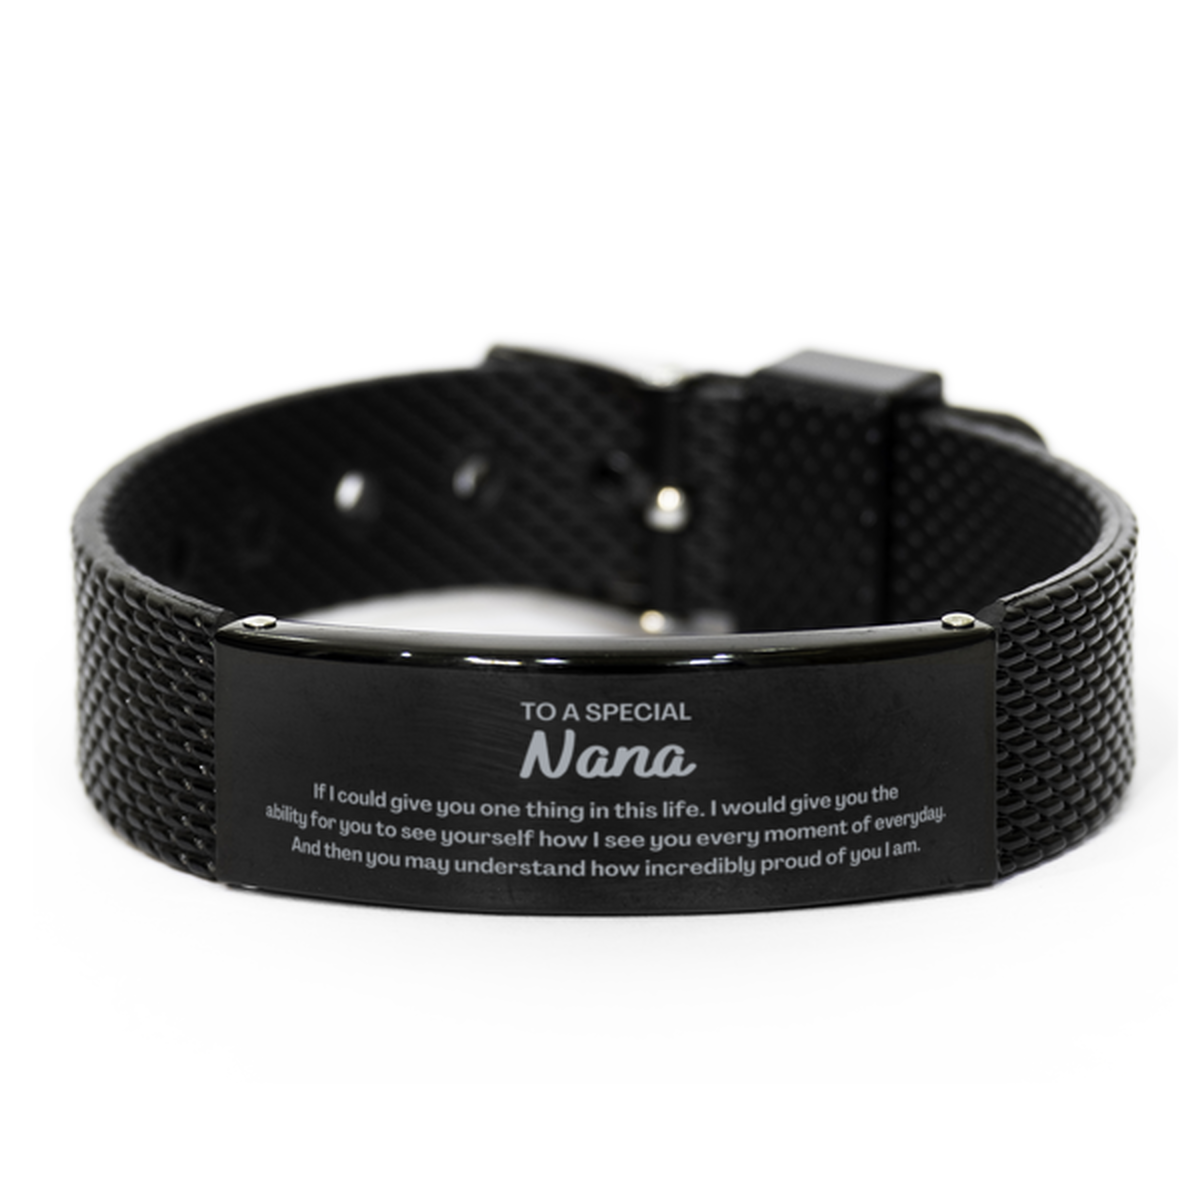 To My Nana Black Shark Mesh Bracelet, Gifts For Nana Engraved, Inspirational Gifts for Christmas Birthday, Epic Gifts for Nana To A Special Nana how incredibly proud of you I am